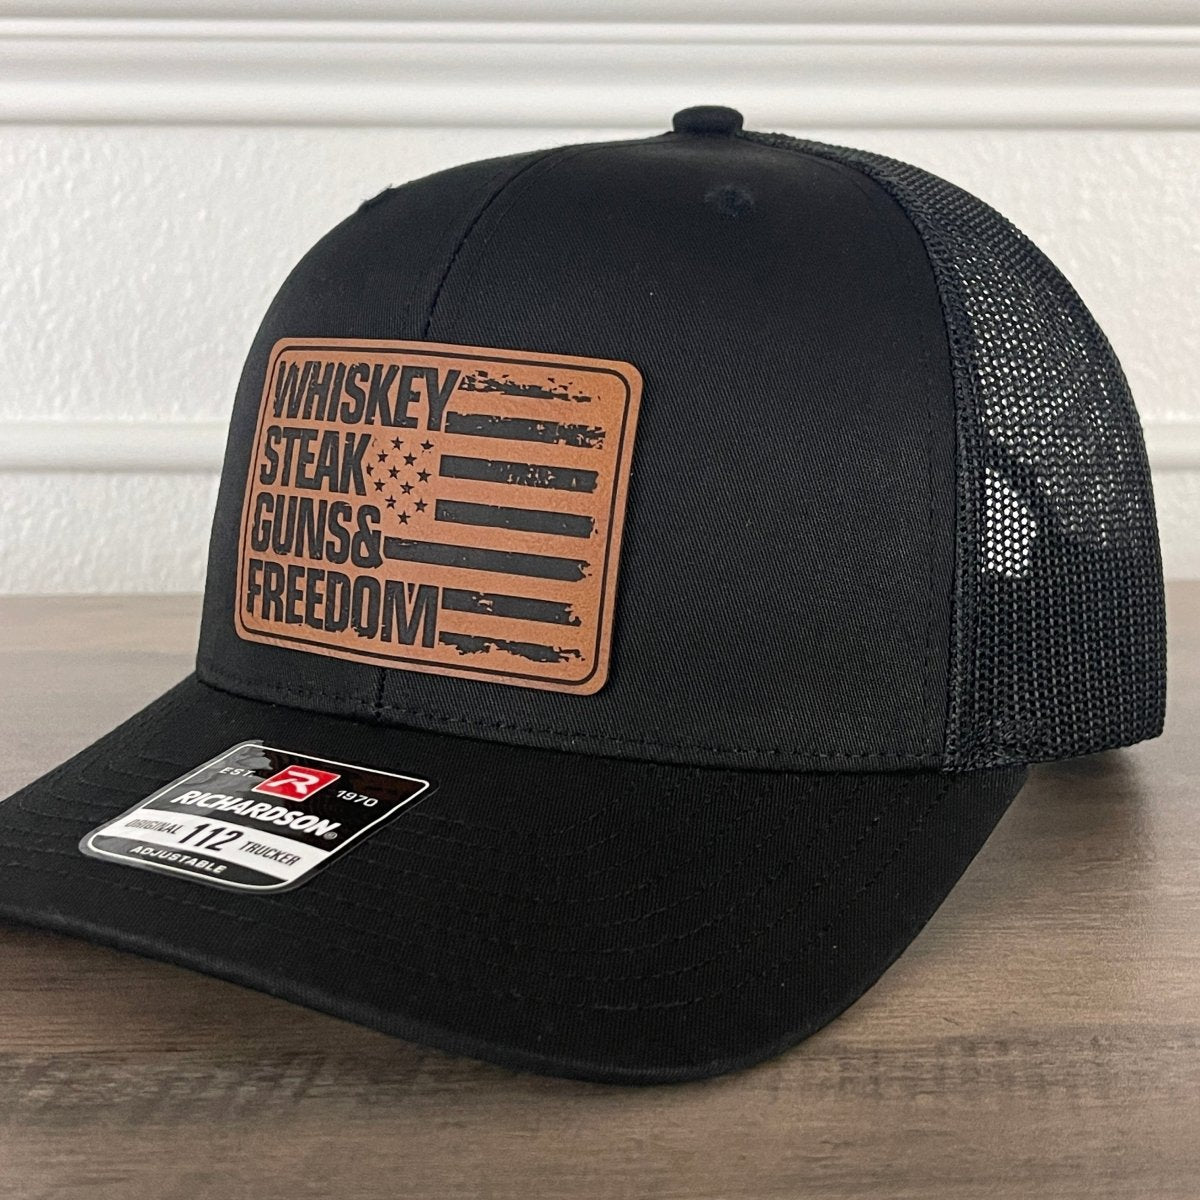 WHISKEY STEAK GUNS & FREEDOM Flag Leather Patch Hat Black Patch Hat - VividEditions